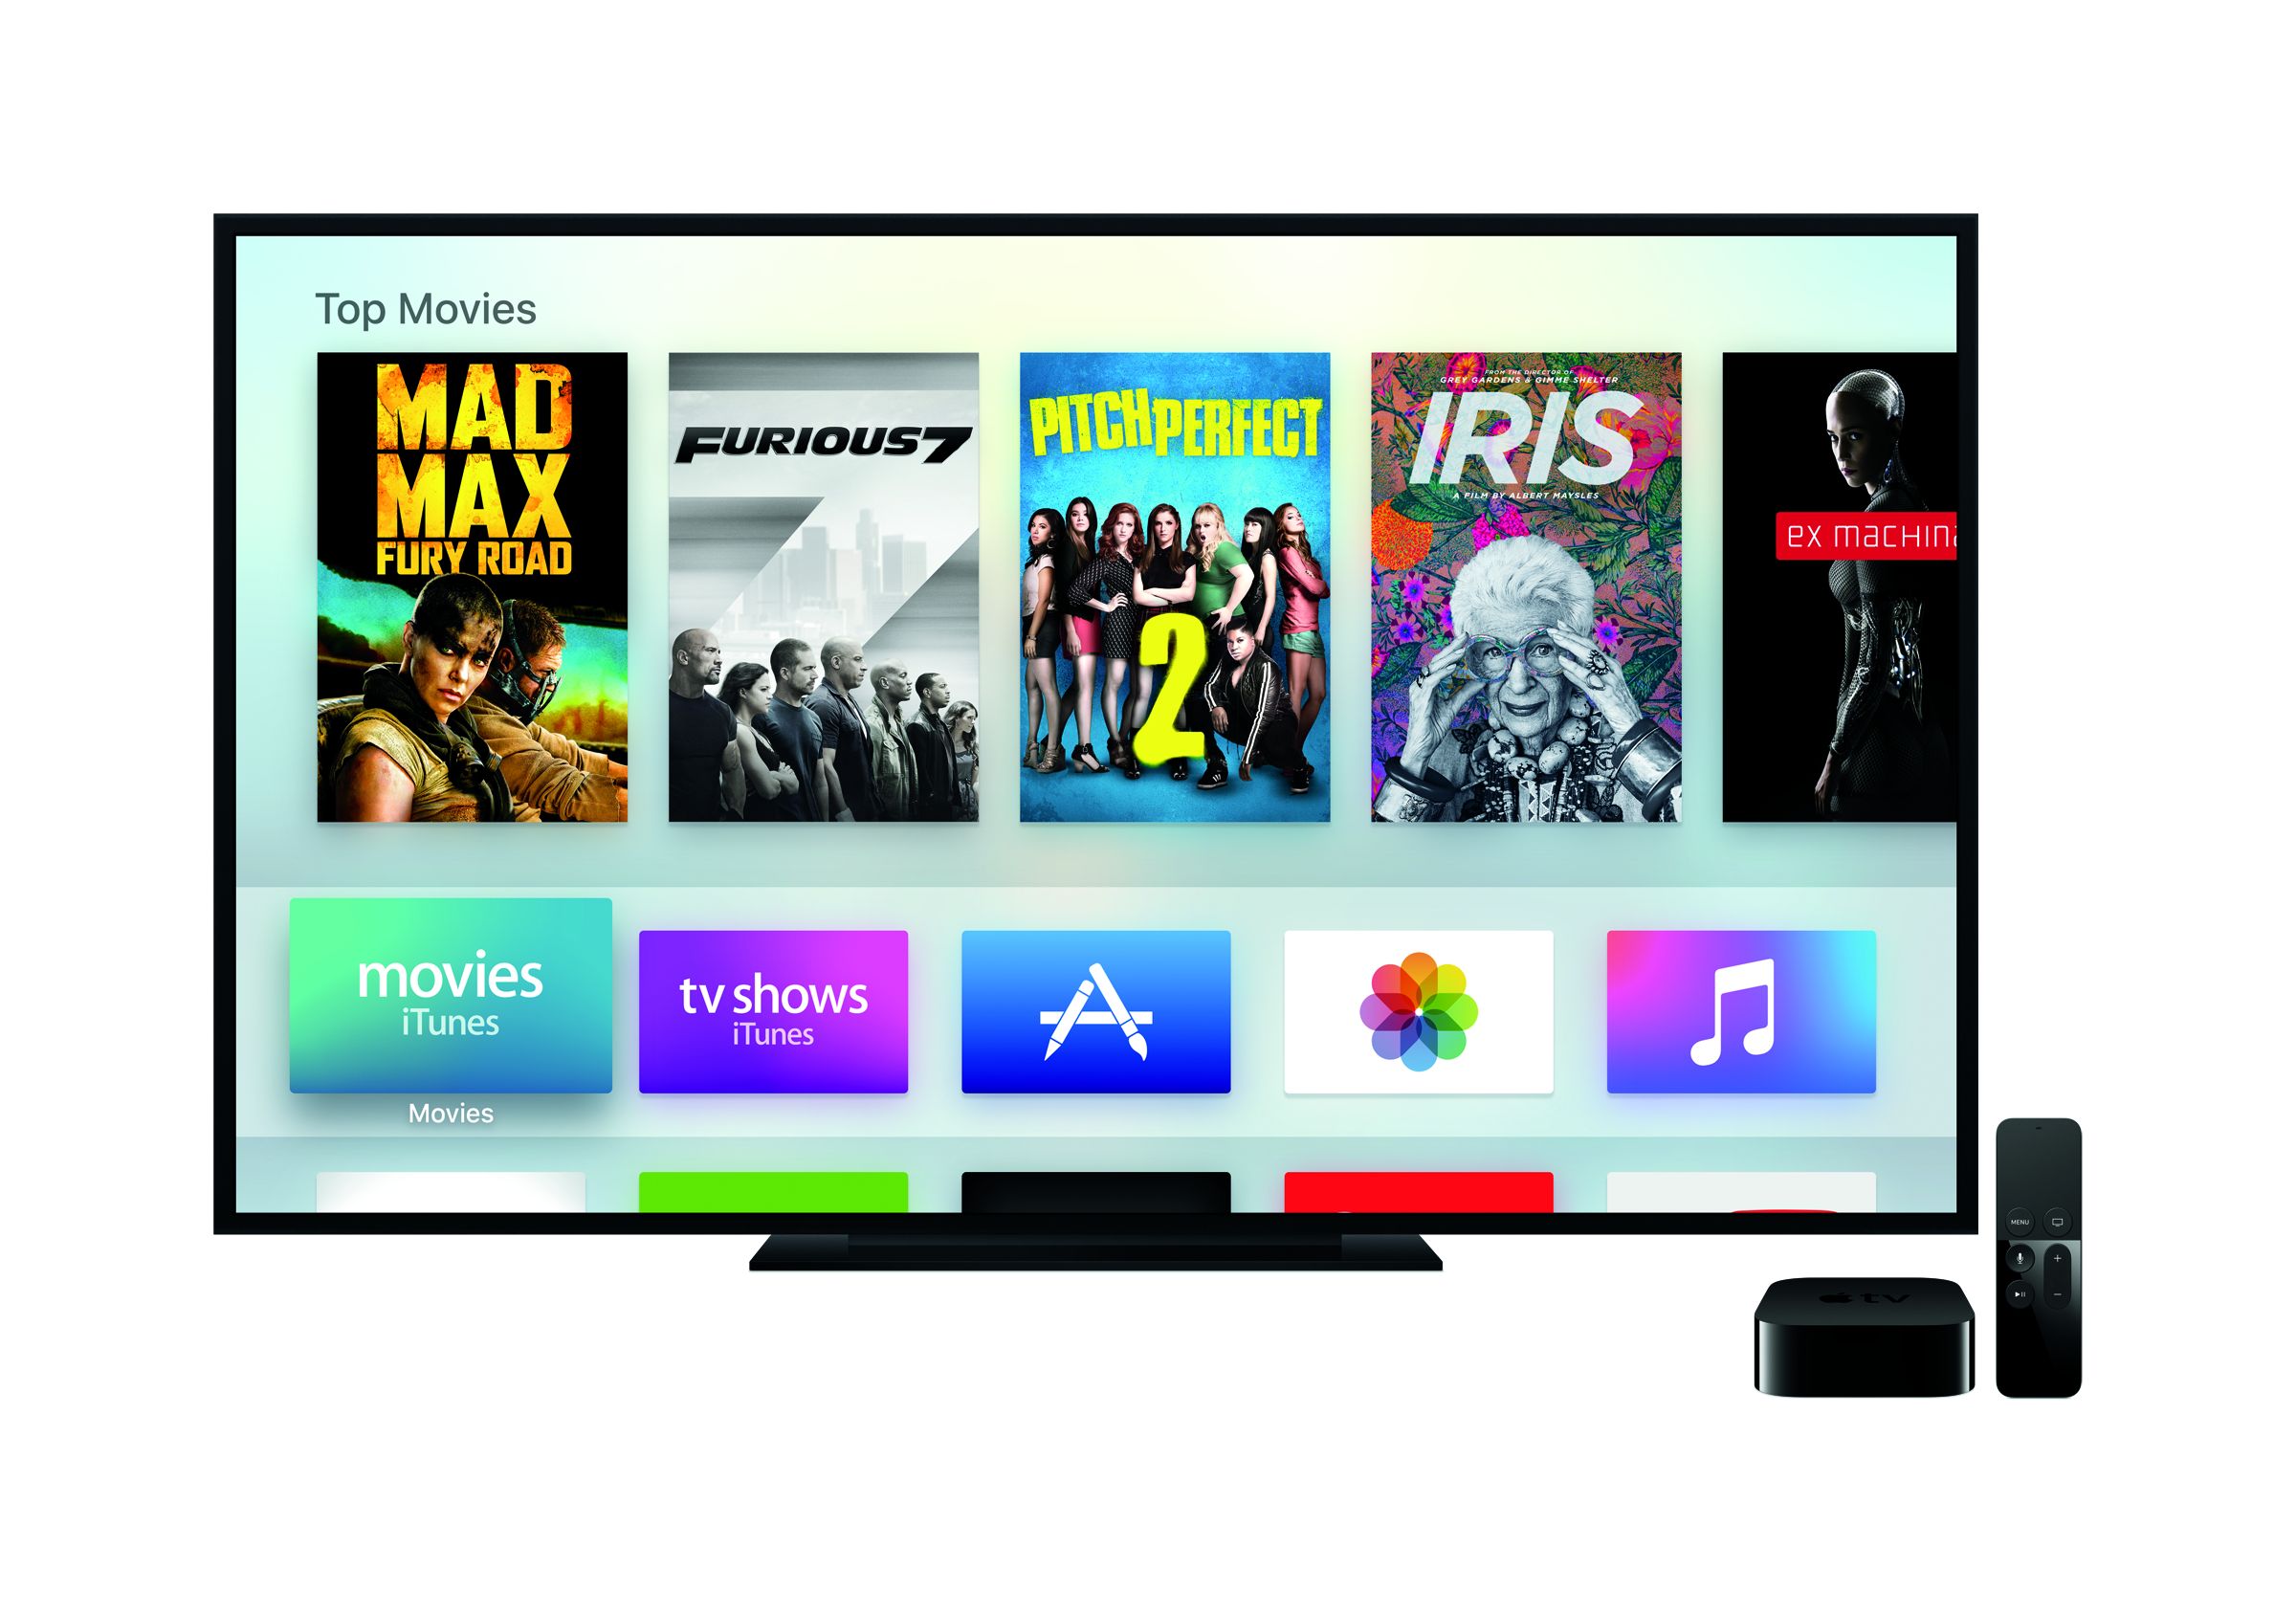 Apple to implement eARC on their upcoming Apple TV 4K